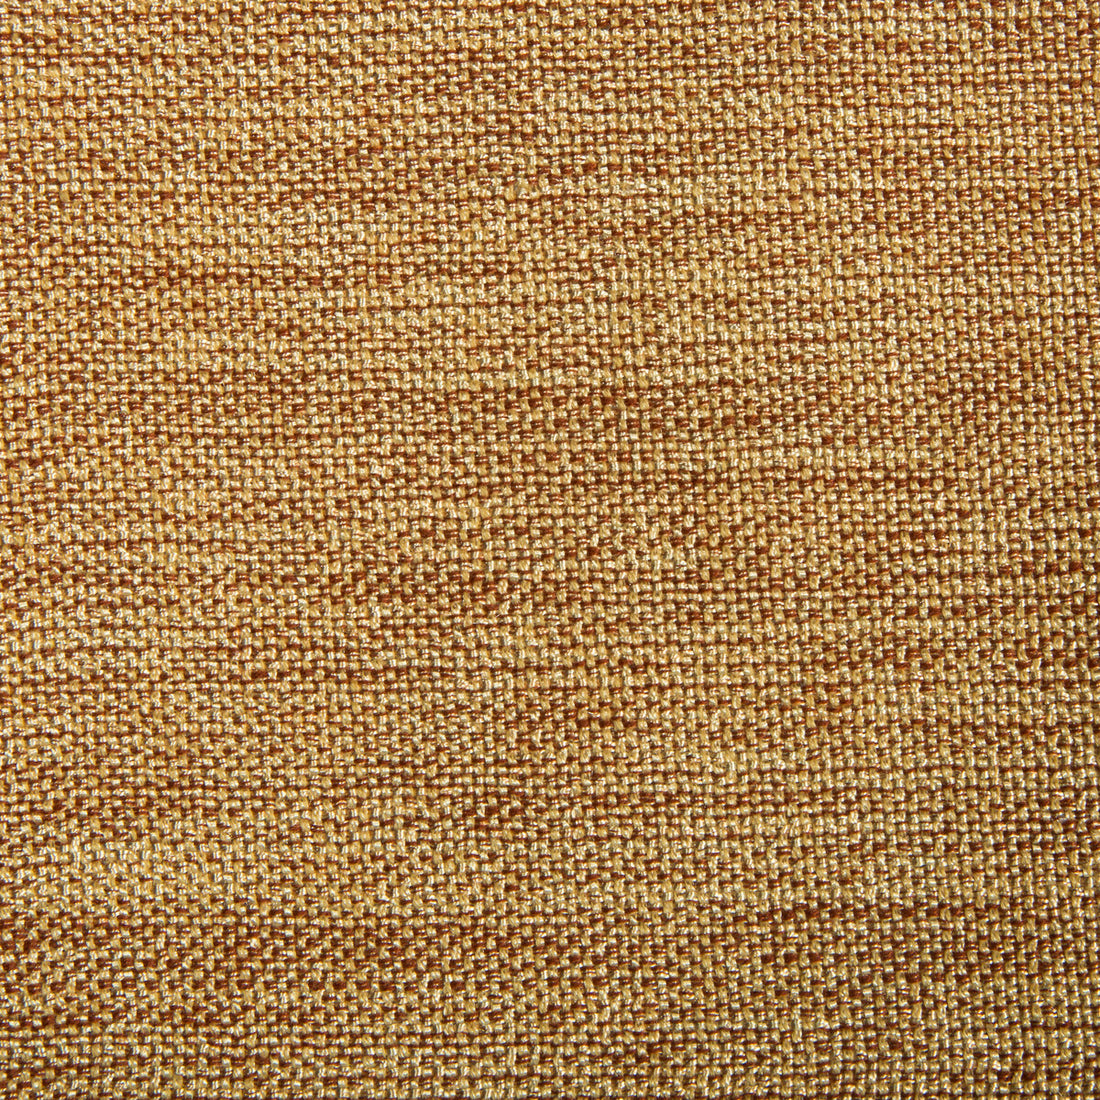 Kravet Contract fabric in 34926-1624 color - pattern 34926.1624.0 - by Kravet Contract